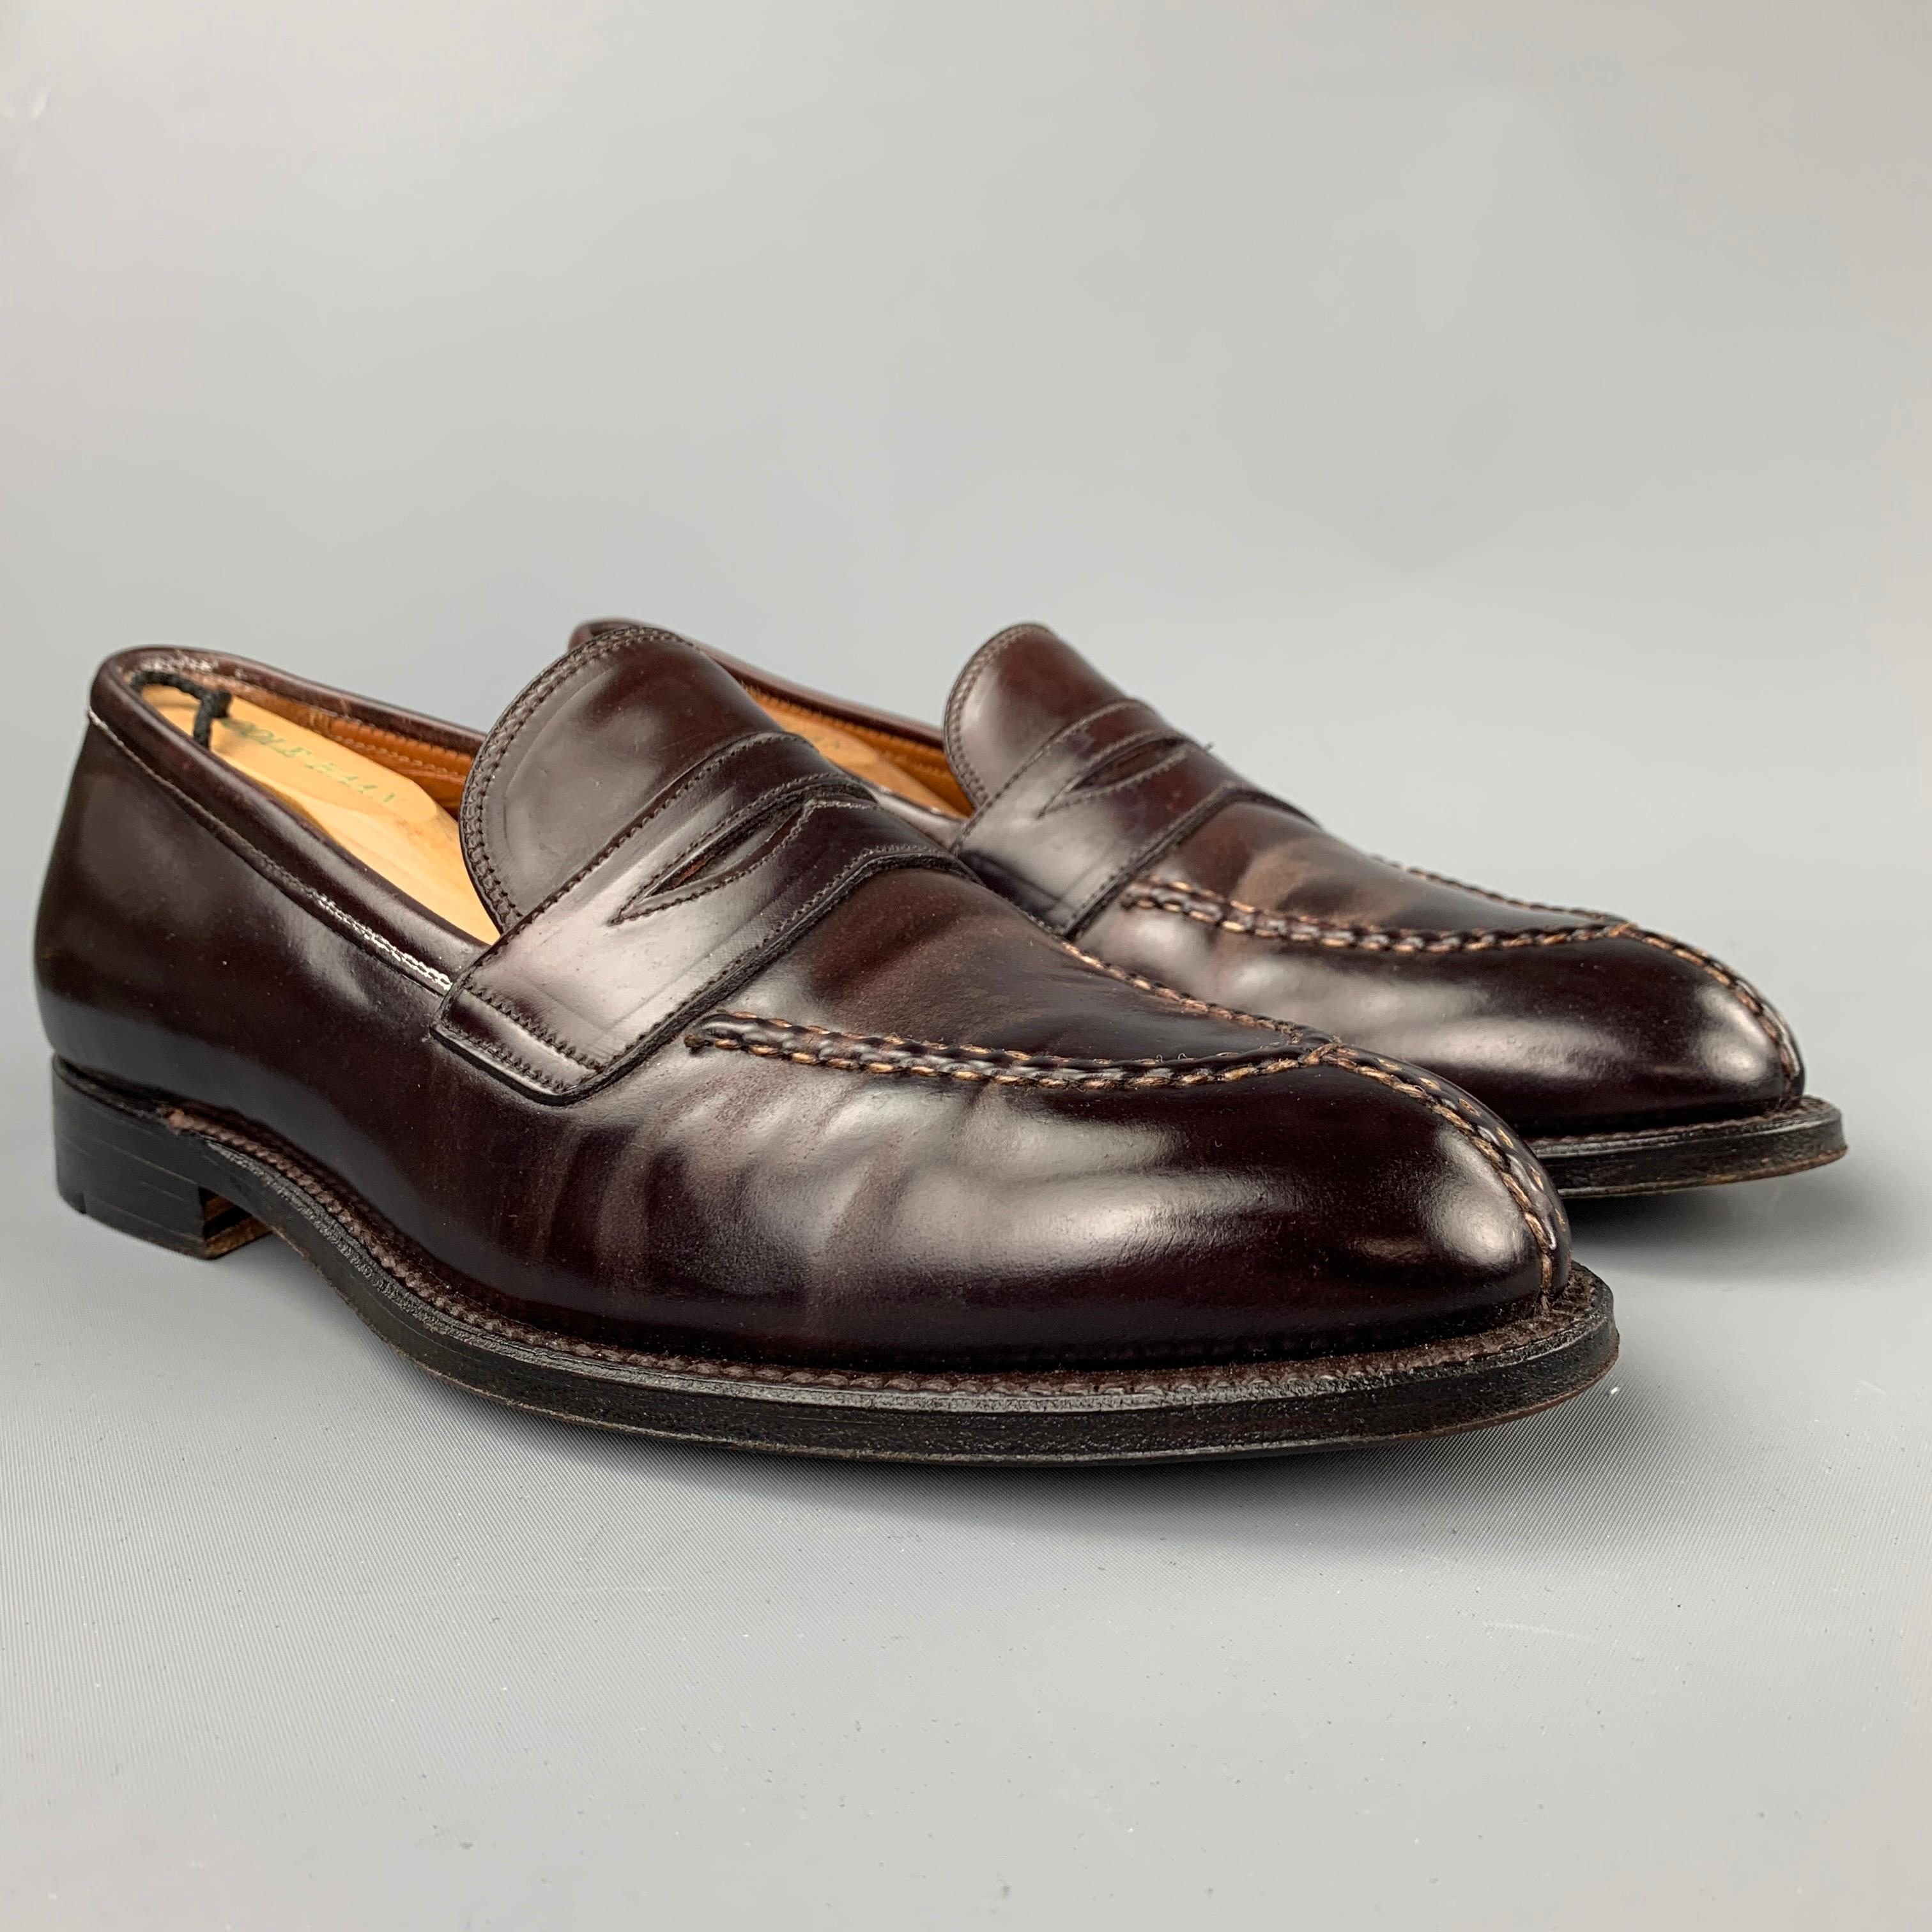 ALDEN loafers comes in a color 8 cordovan leather featuring a penny strap, top stitching, slip on, and a wooden sole. Made in USA.

Very Good Pre-Owned Condition.
Marked: 10 B/D

Outsole: 12 in. x 4 in.